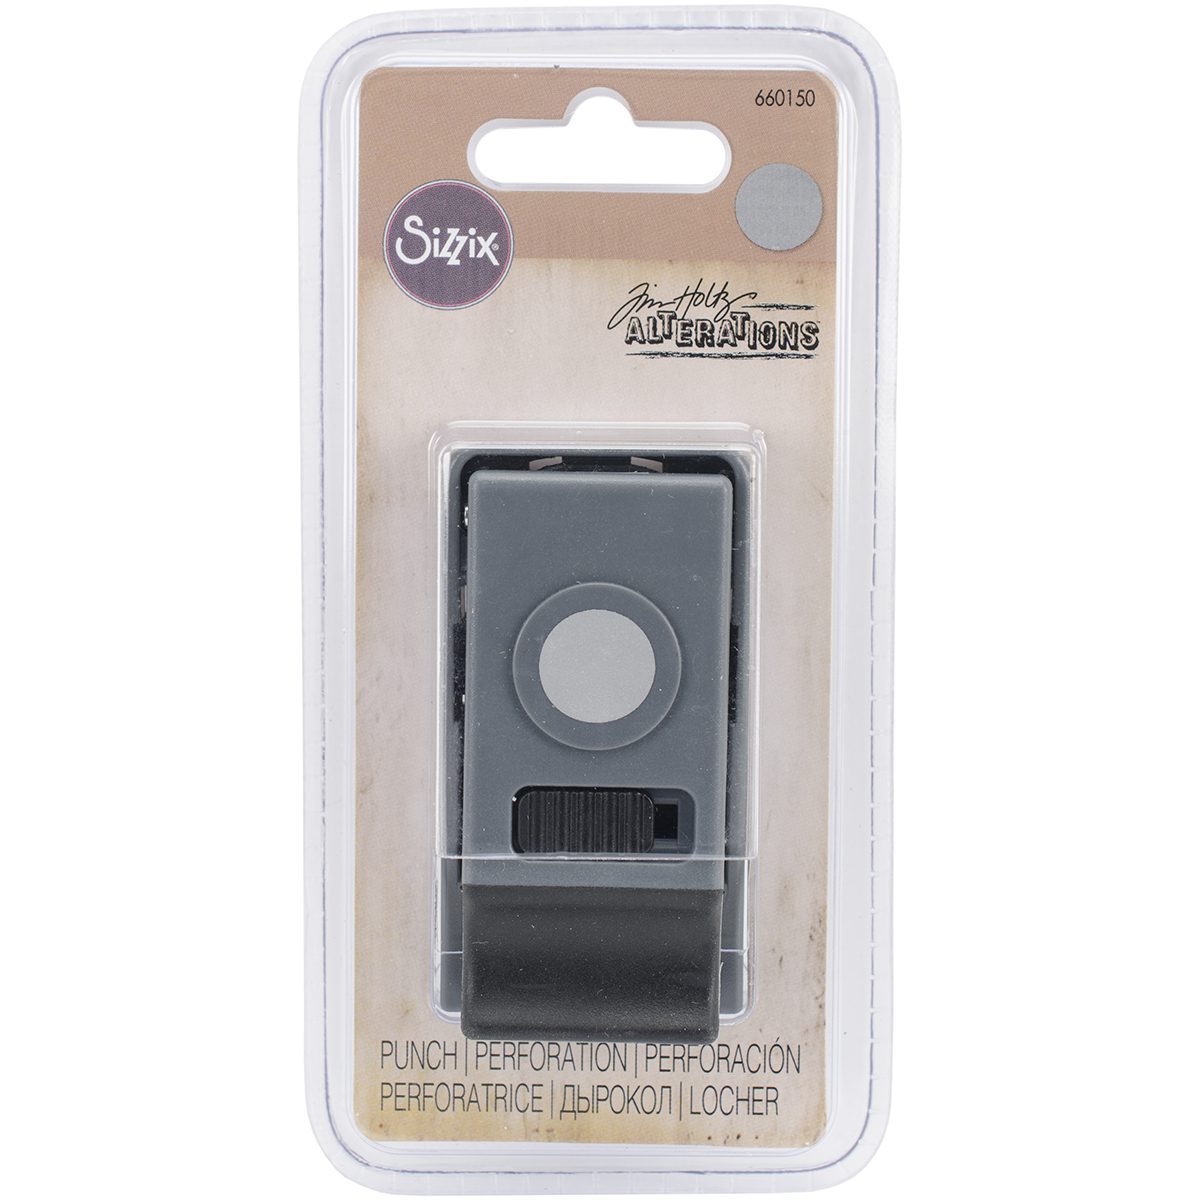 660150 5 X 5 In. Tim Holtz Alterations Collection Small Paper Punch